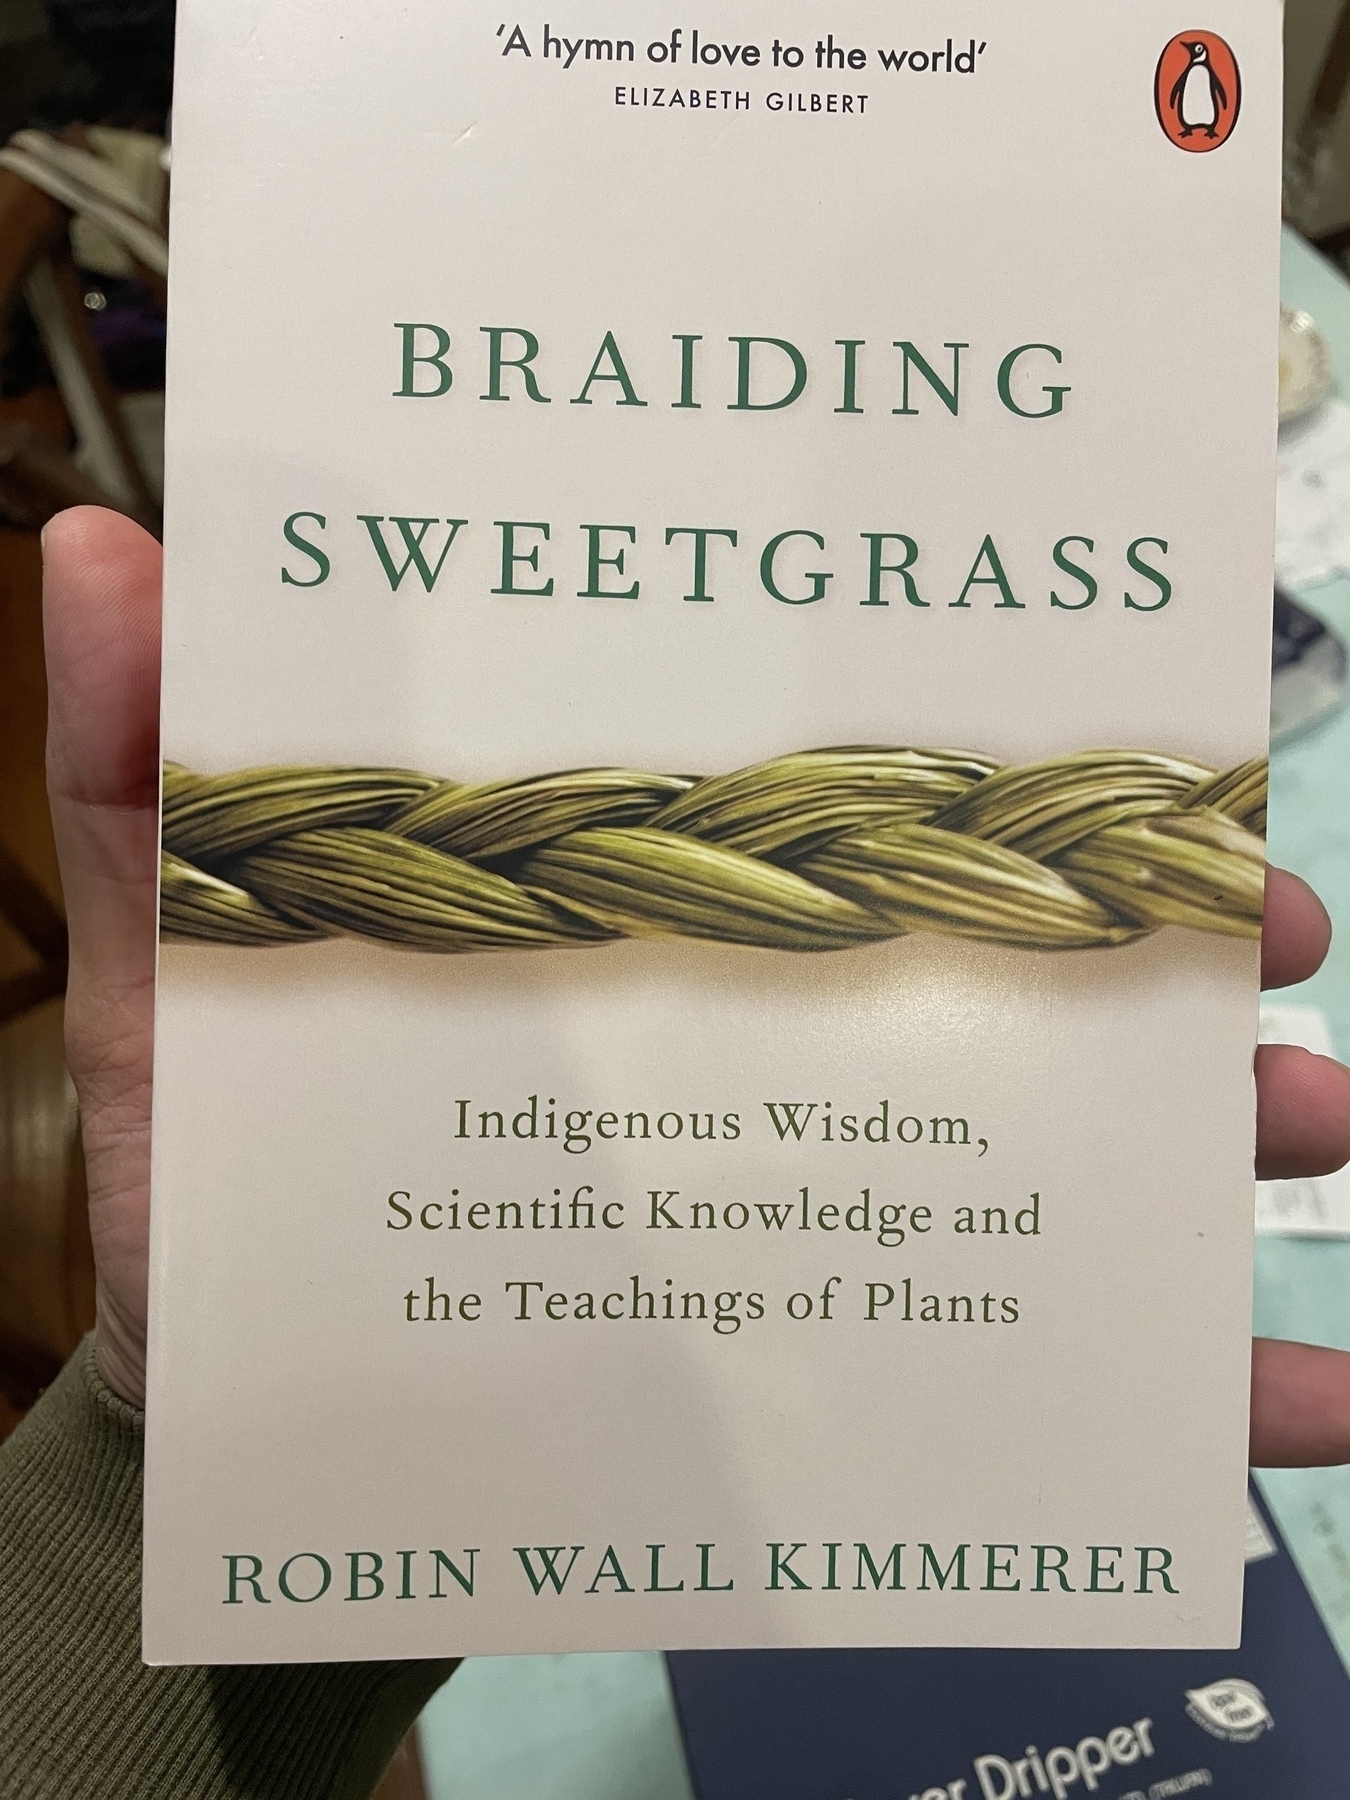 Photo of the book Braiding Sweetgrass by Robin Wall Kimmerer